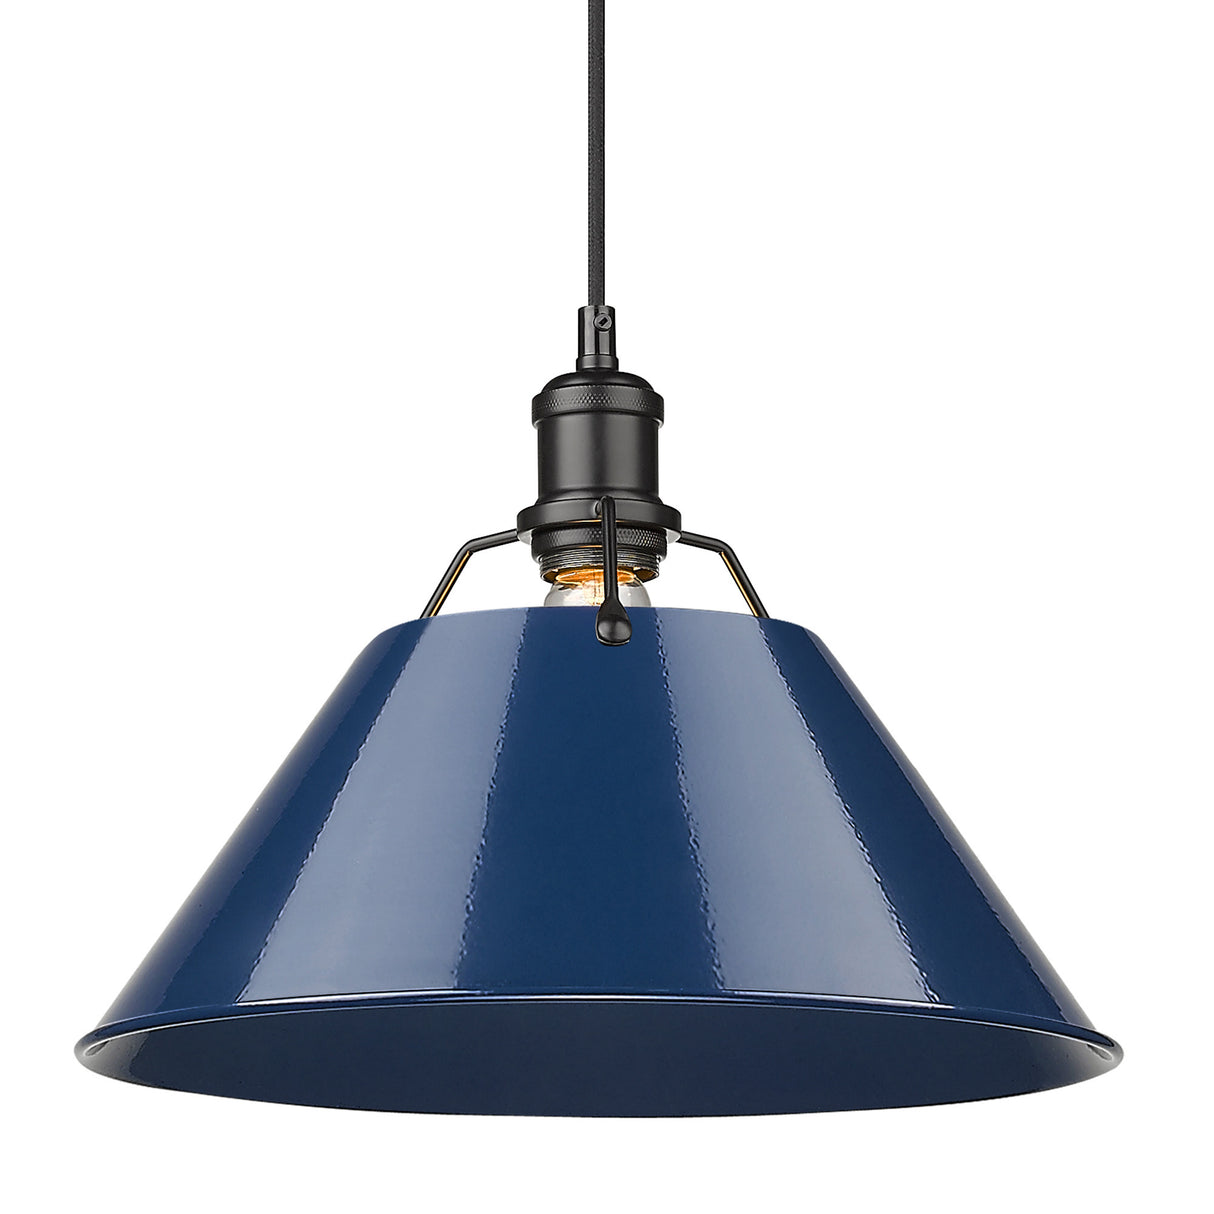 Orwell BLK 1 Light Pendant - 14" in Matte Black with Navy Blue Shade